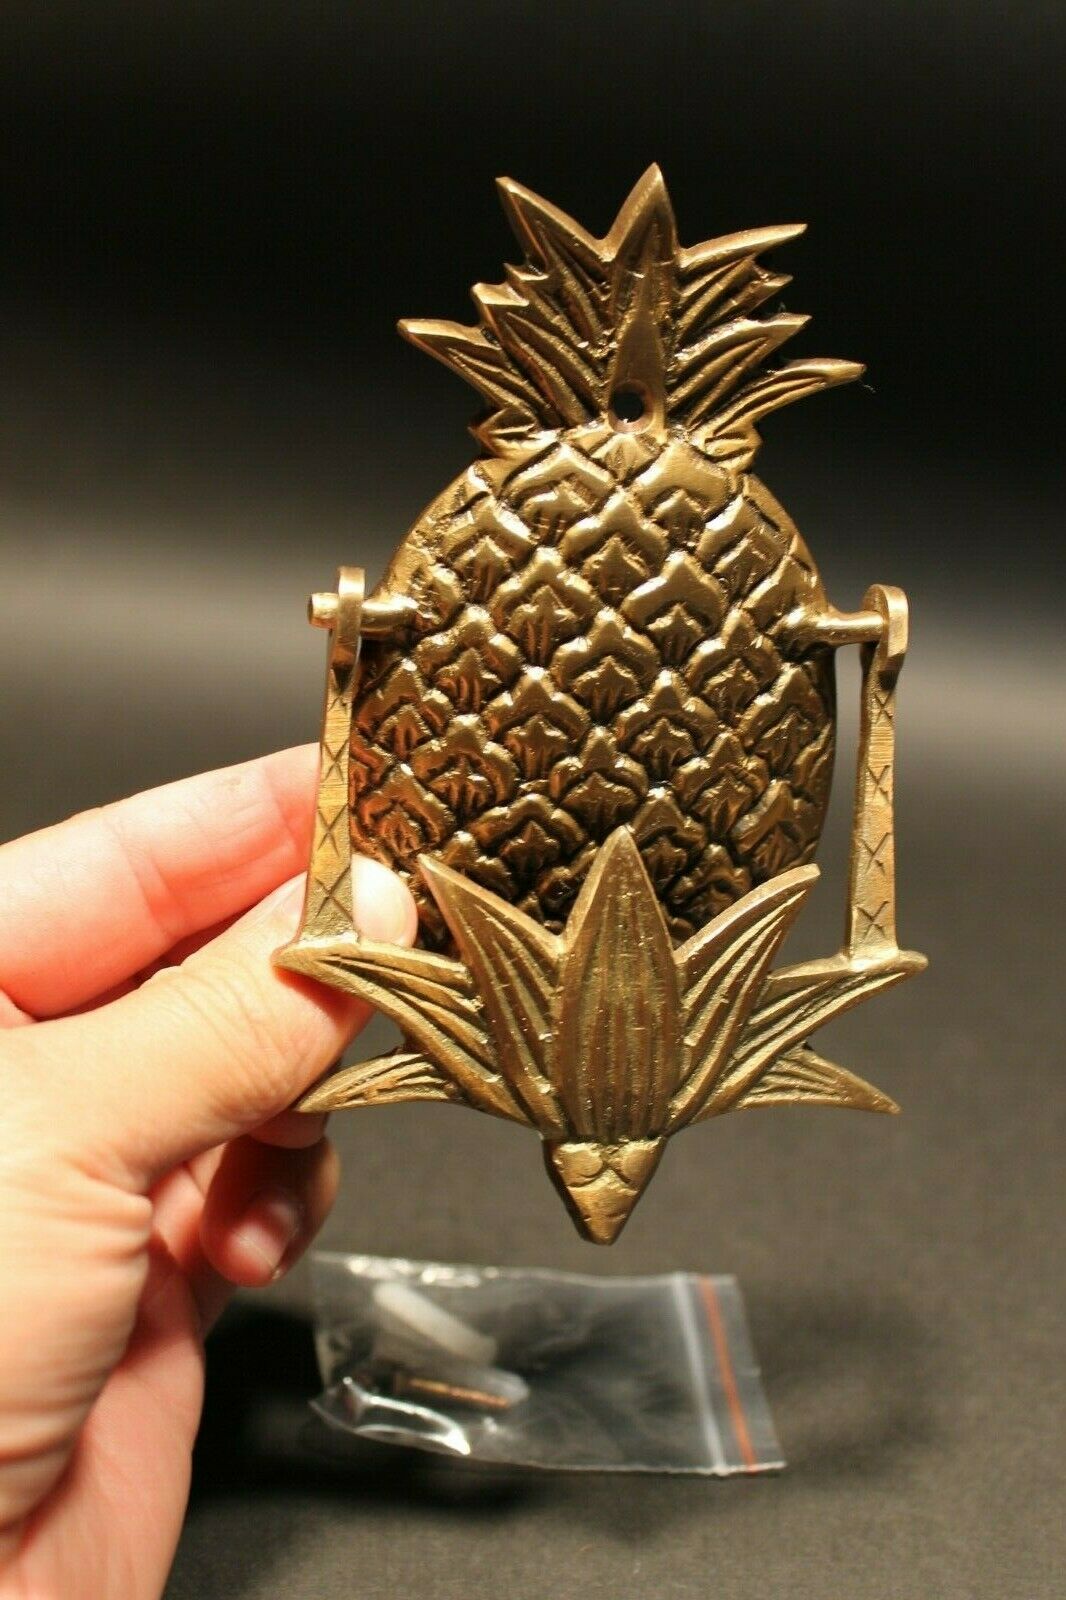 Antique Vintage Style Brass Pineapple Door knocker - Early Home Decor